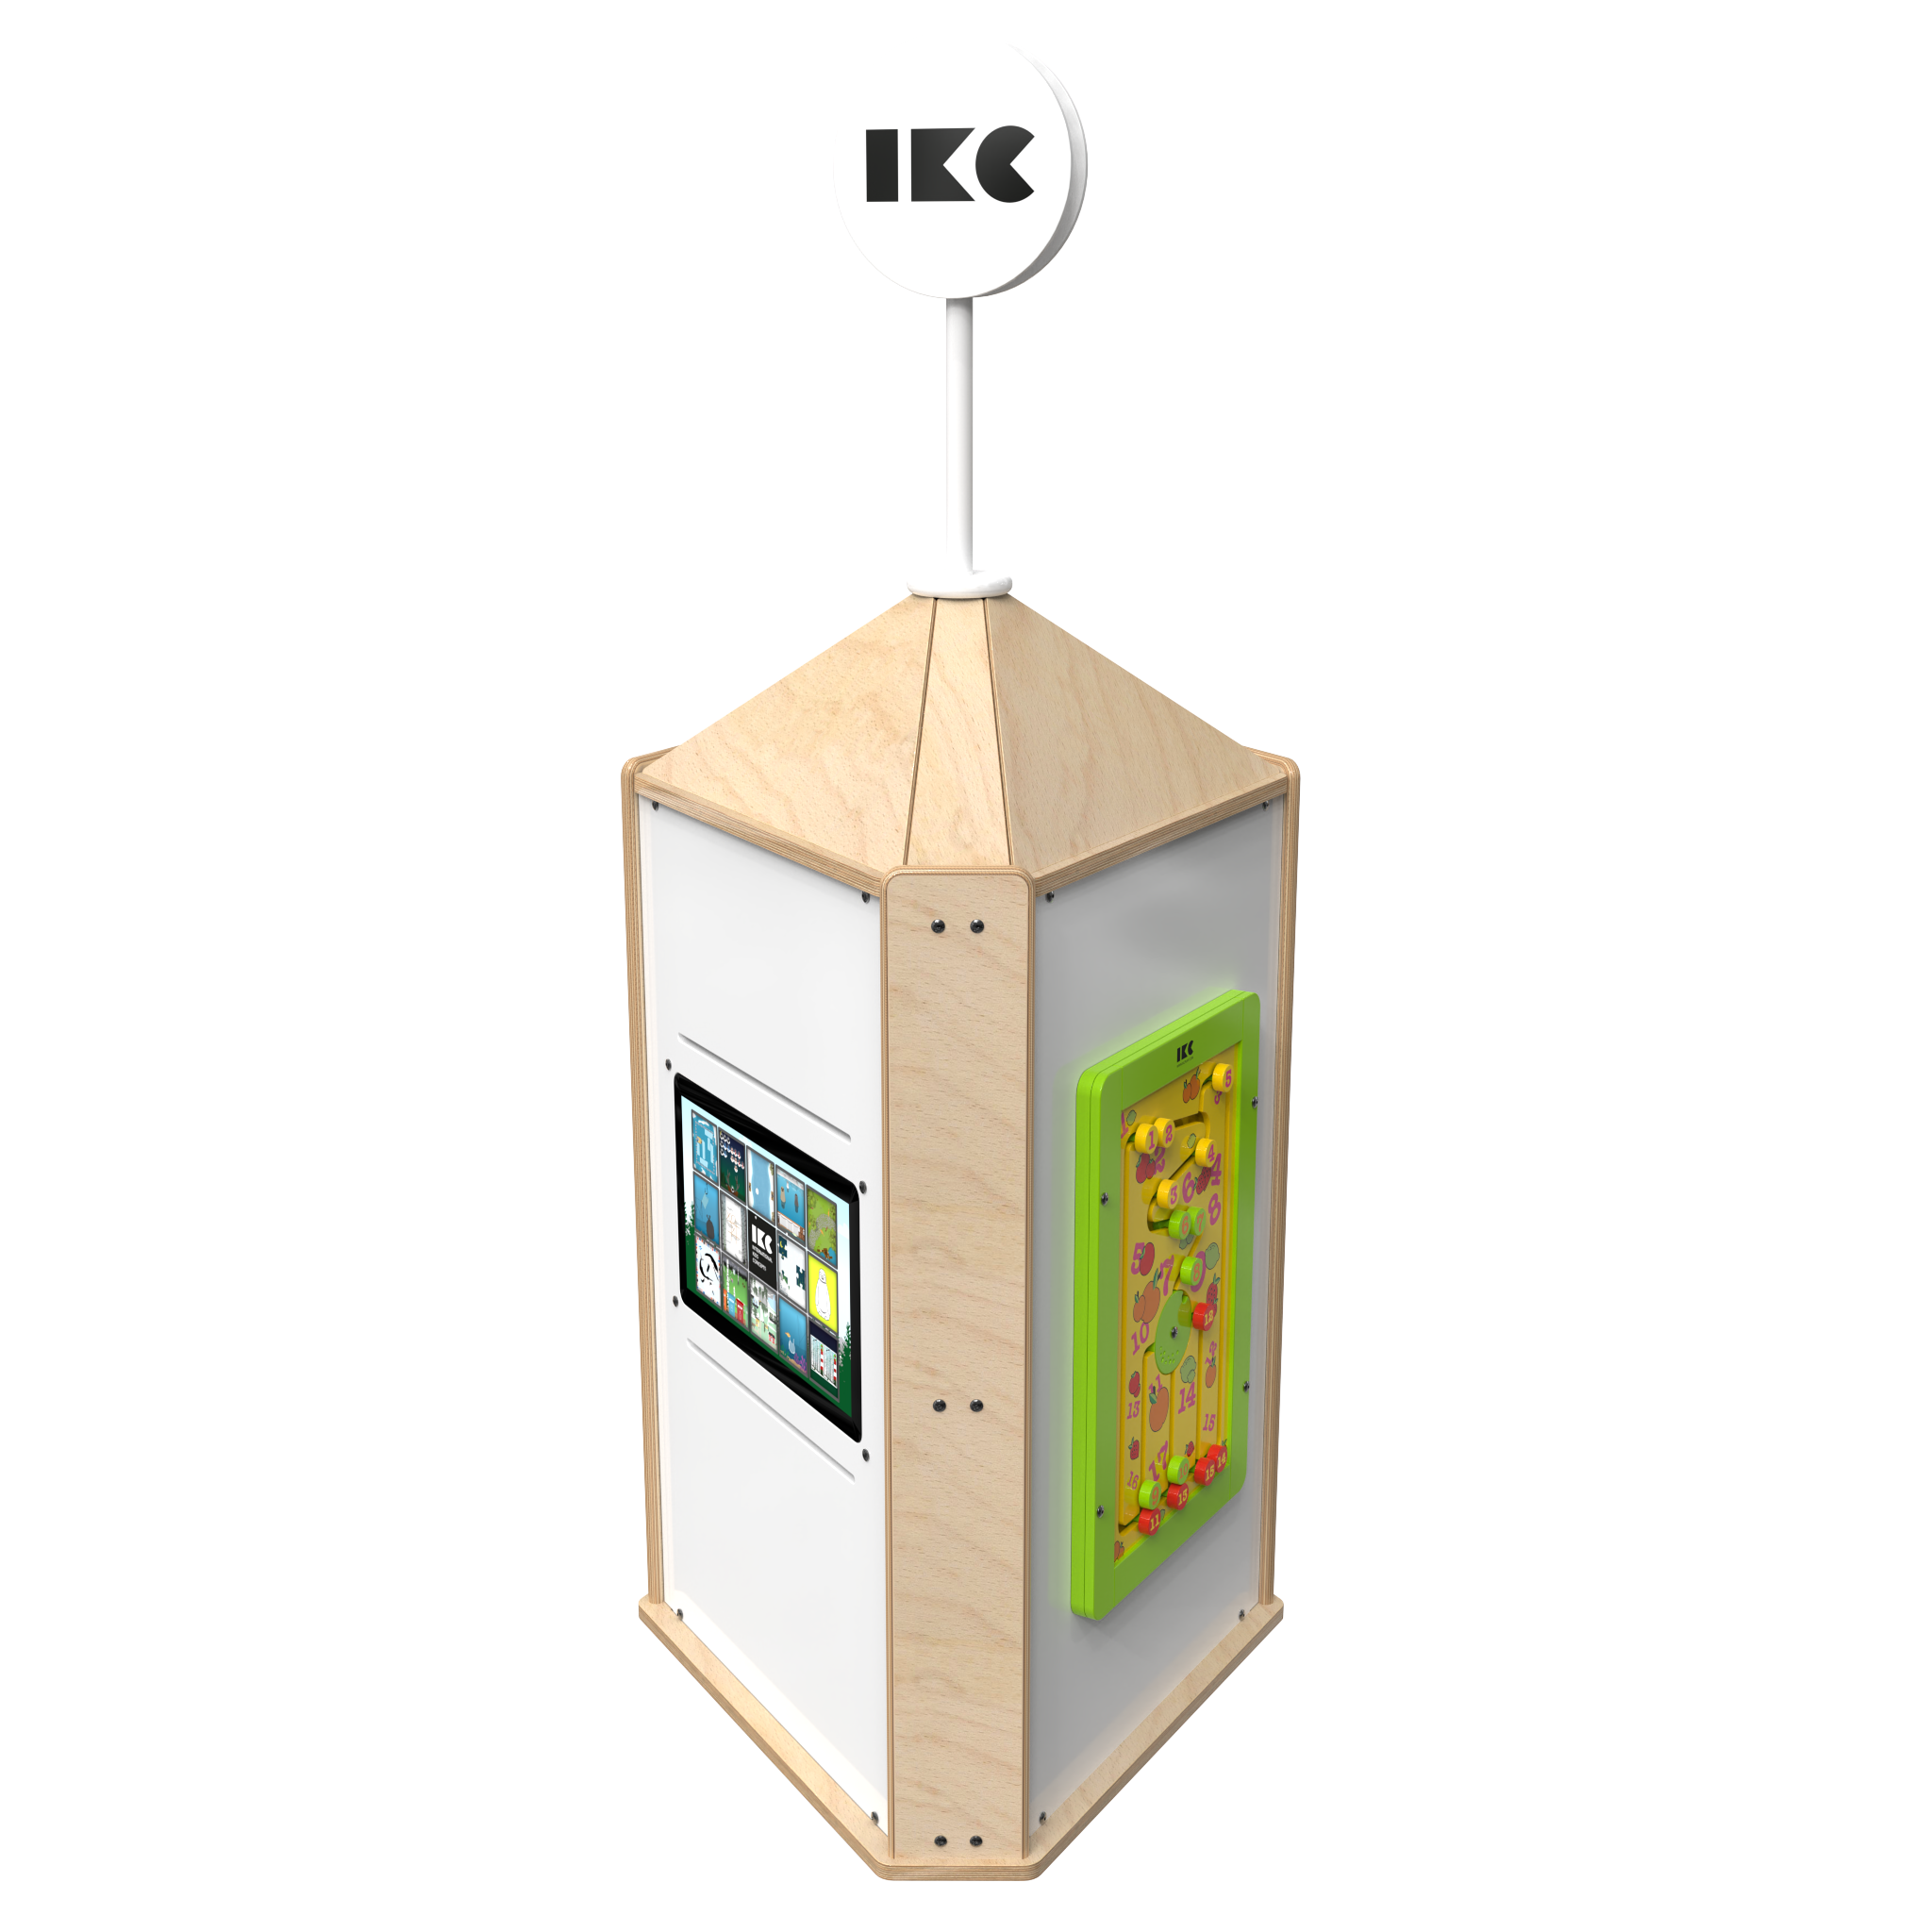 IKC Playtower touch wood